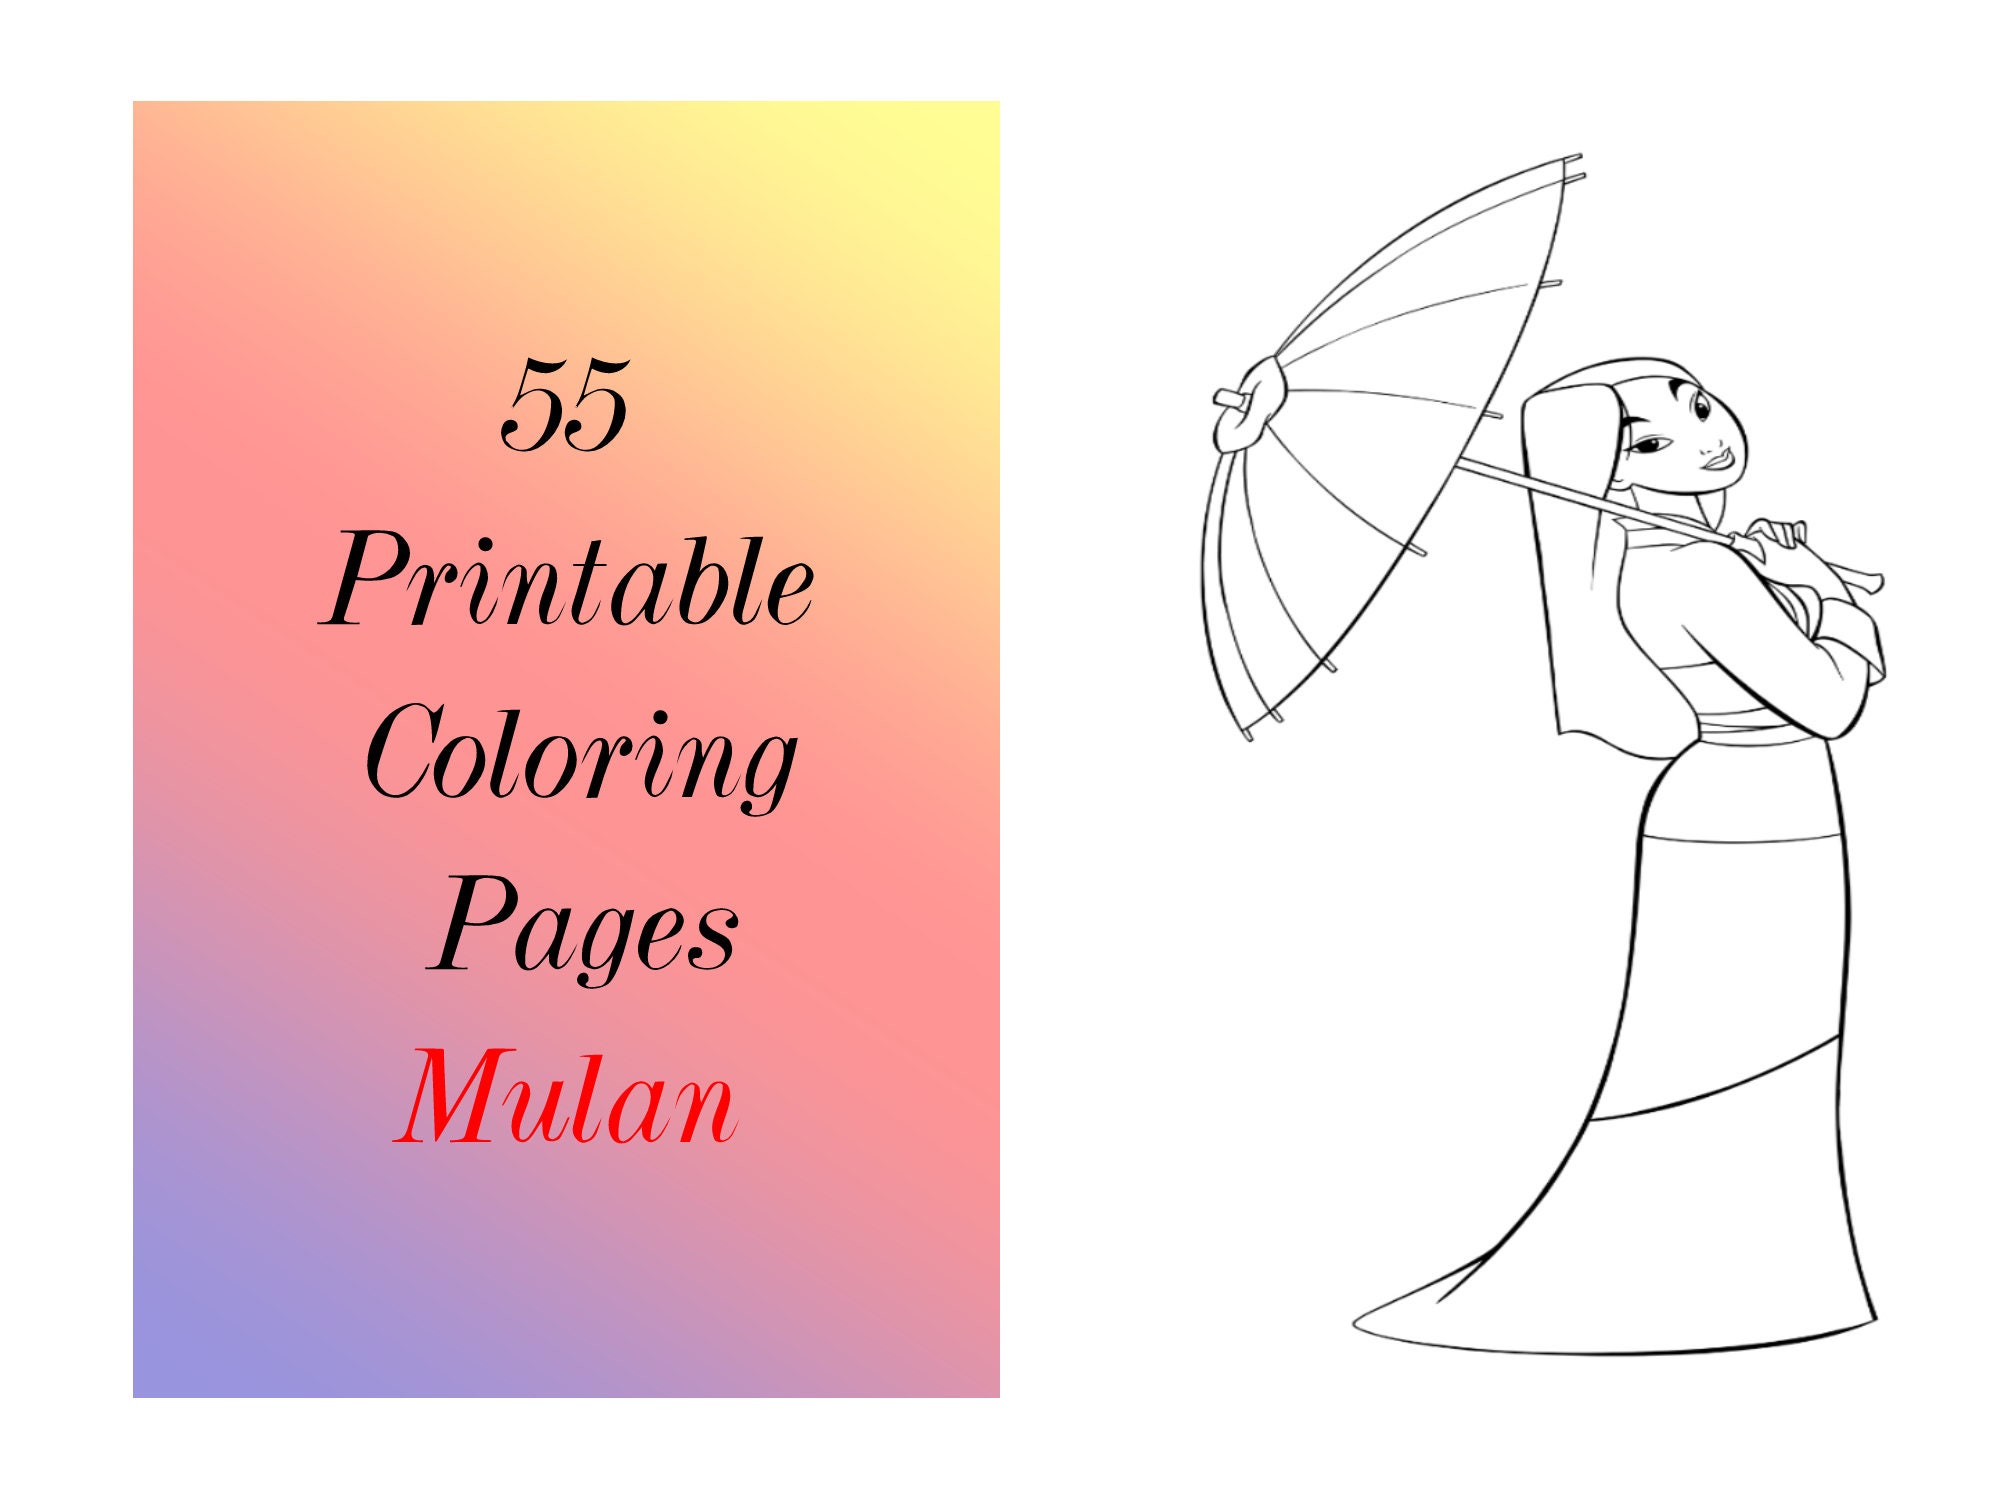 Coloring pages pdf printable cute princess easy color sheets for kids girls boys digital coloring book instant download